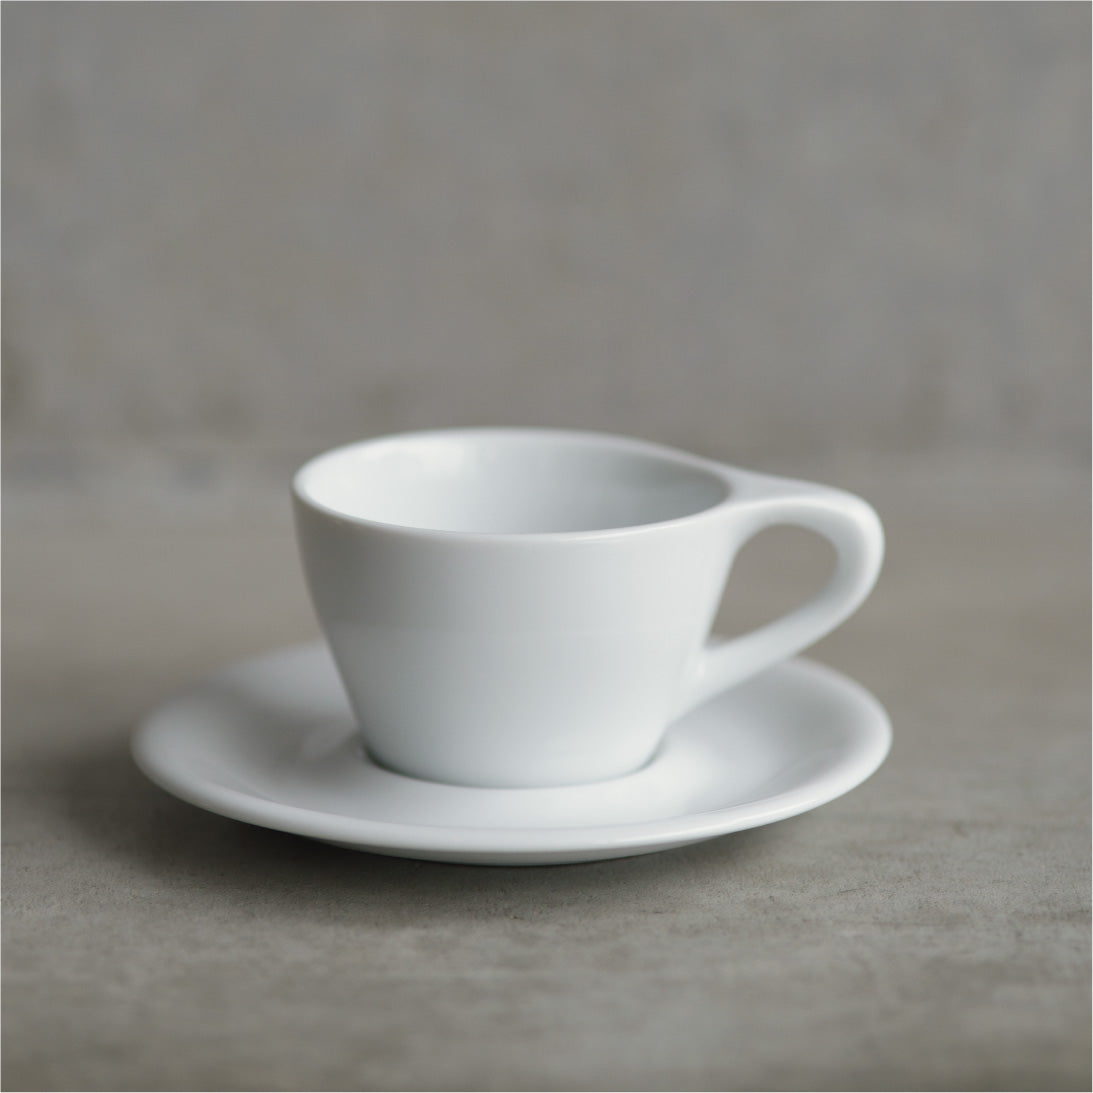 notNeutral LN Cappuccino Cup & Saucer 6oz (カプチーノ用 カップ ＆ ソーサー)